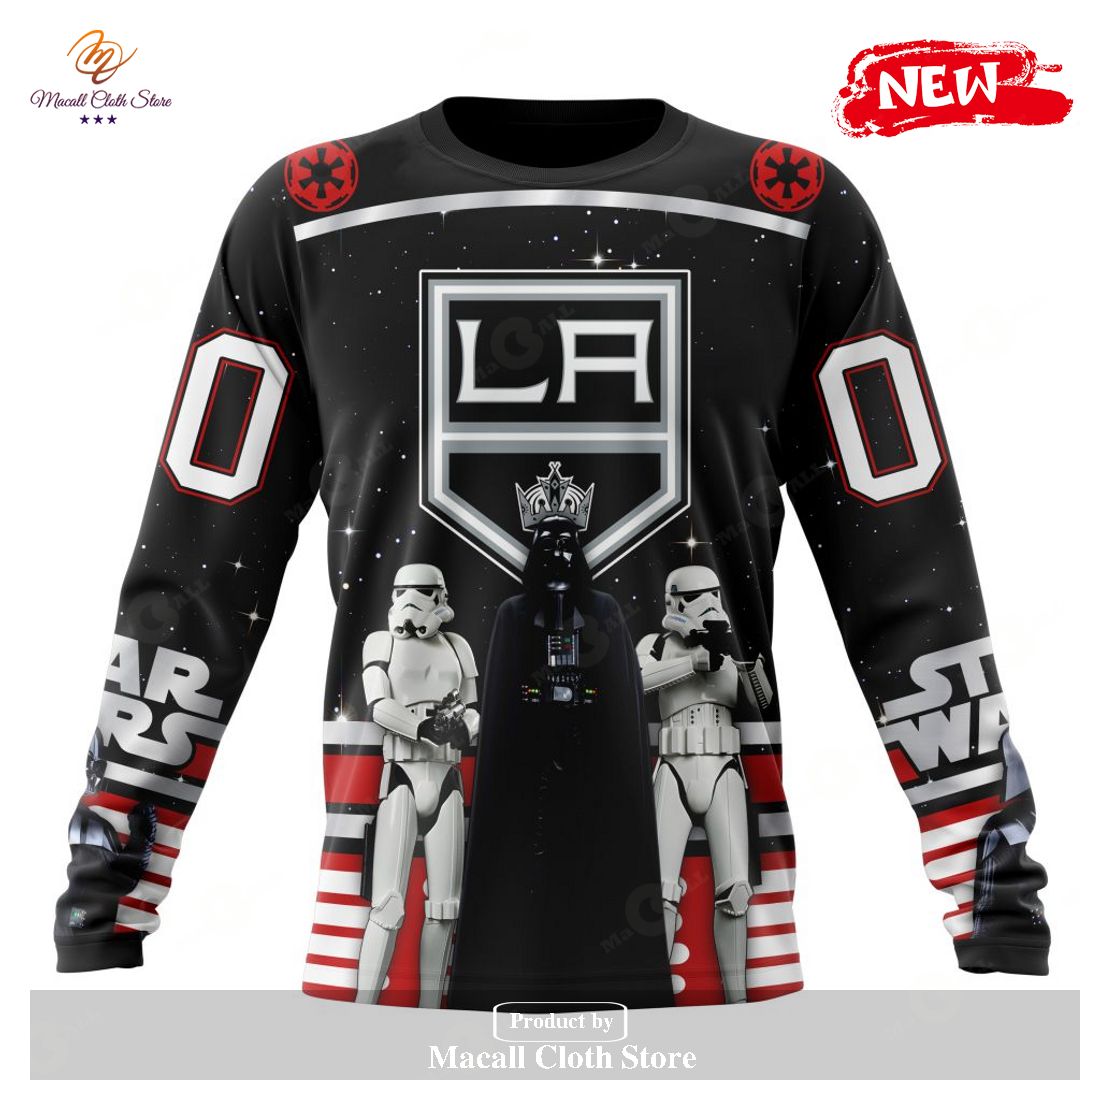 Personalized NHL Los Angeles Kings Star Wars May The 4th Be With